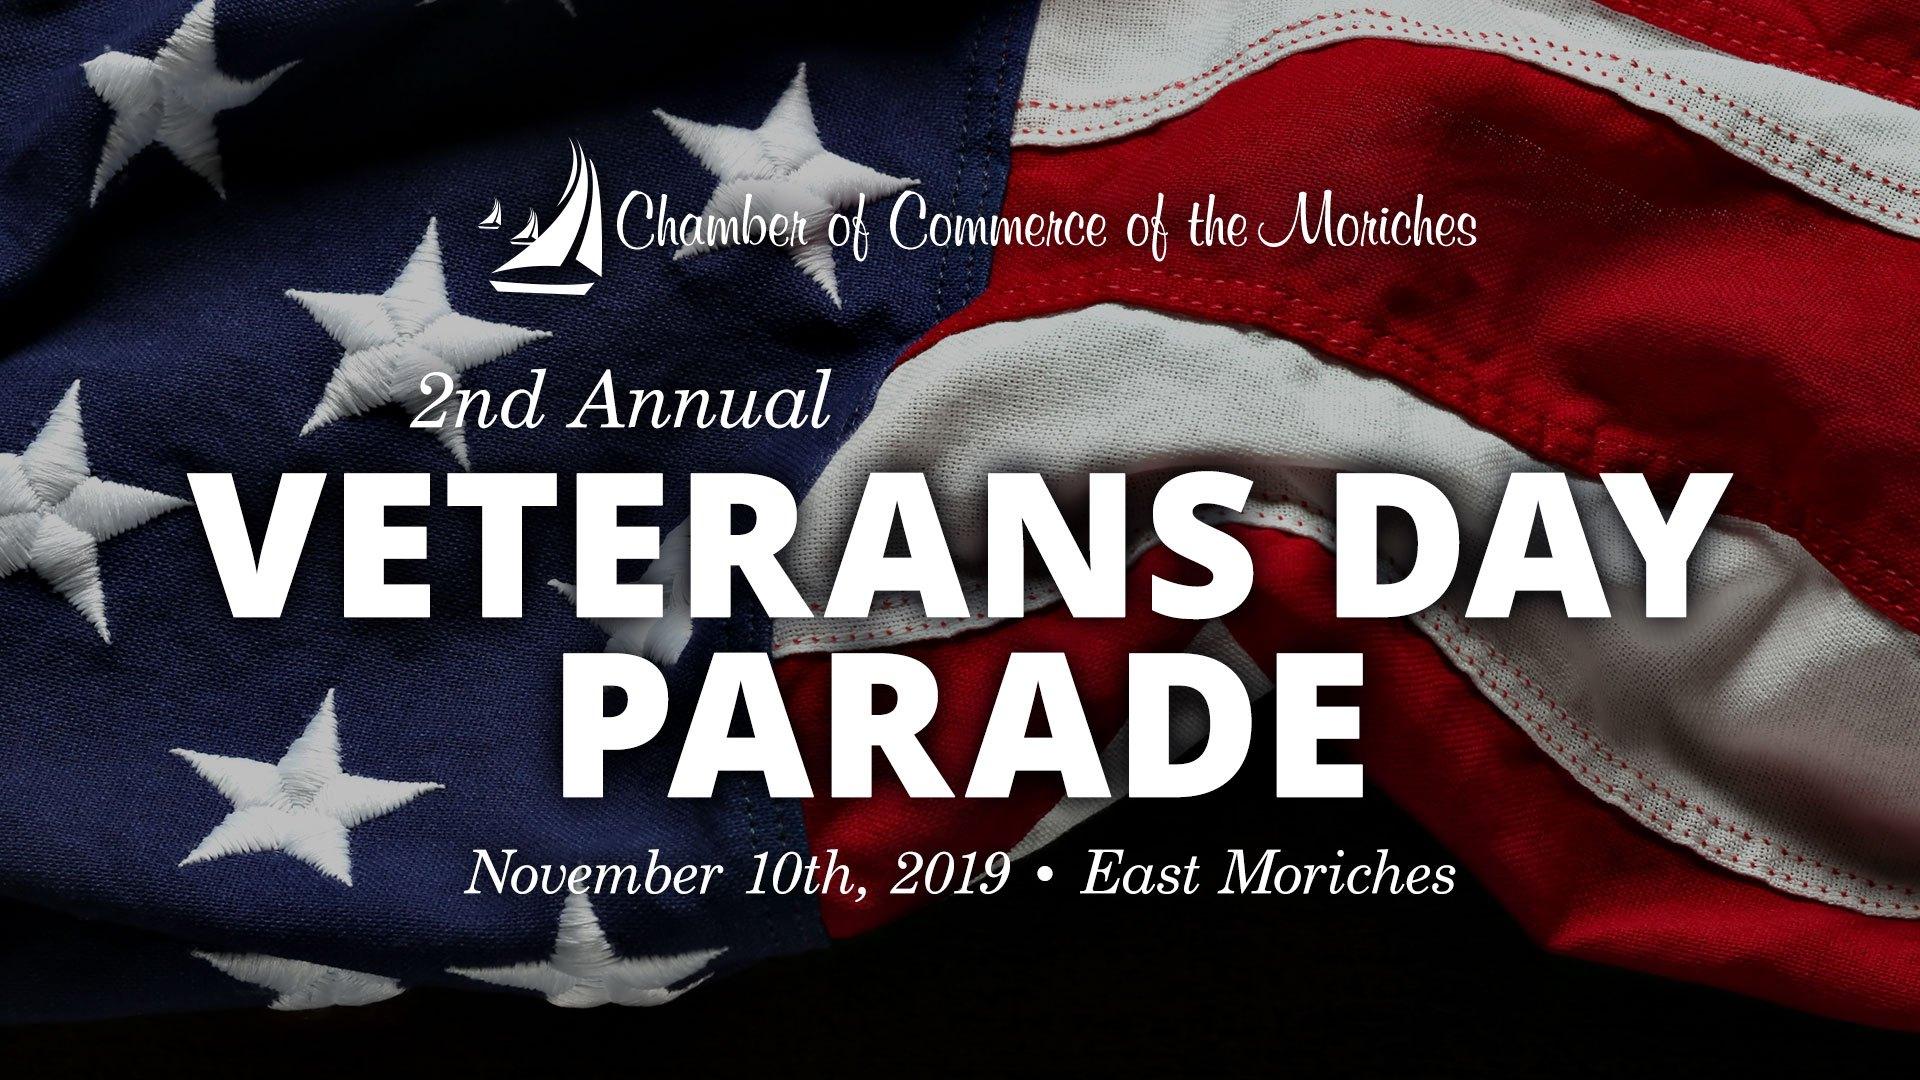 Second Annual Veterans Day Parade of Commerce